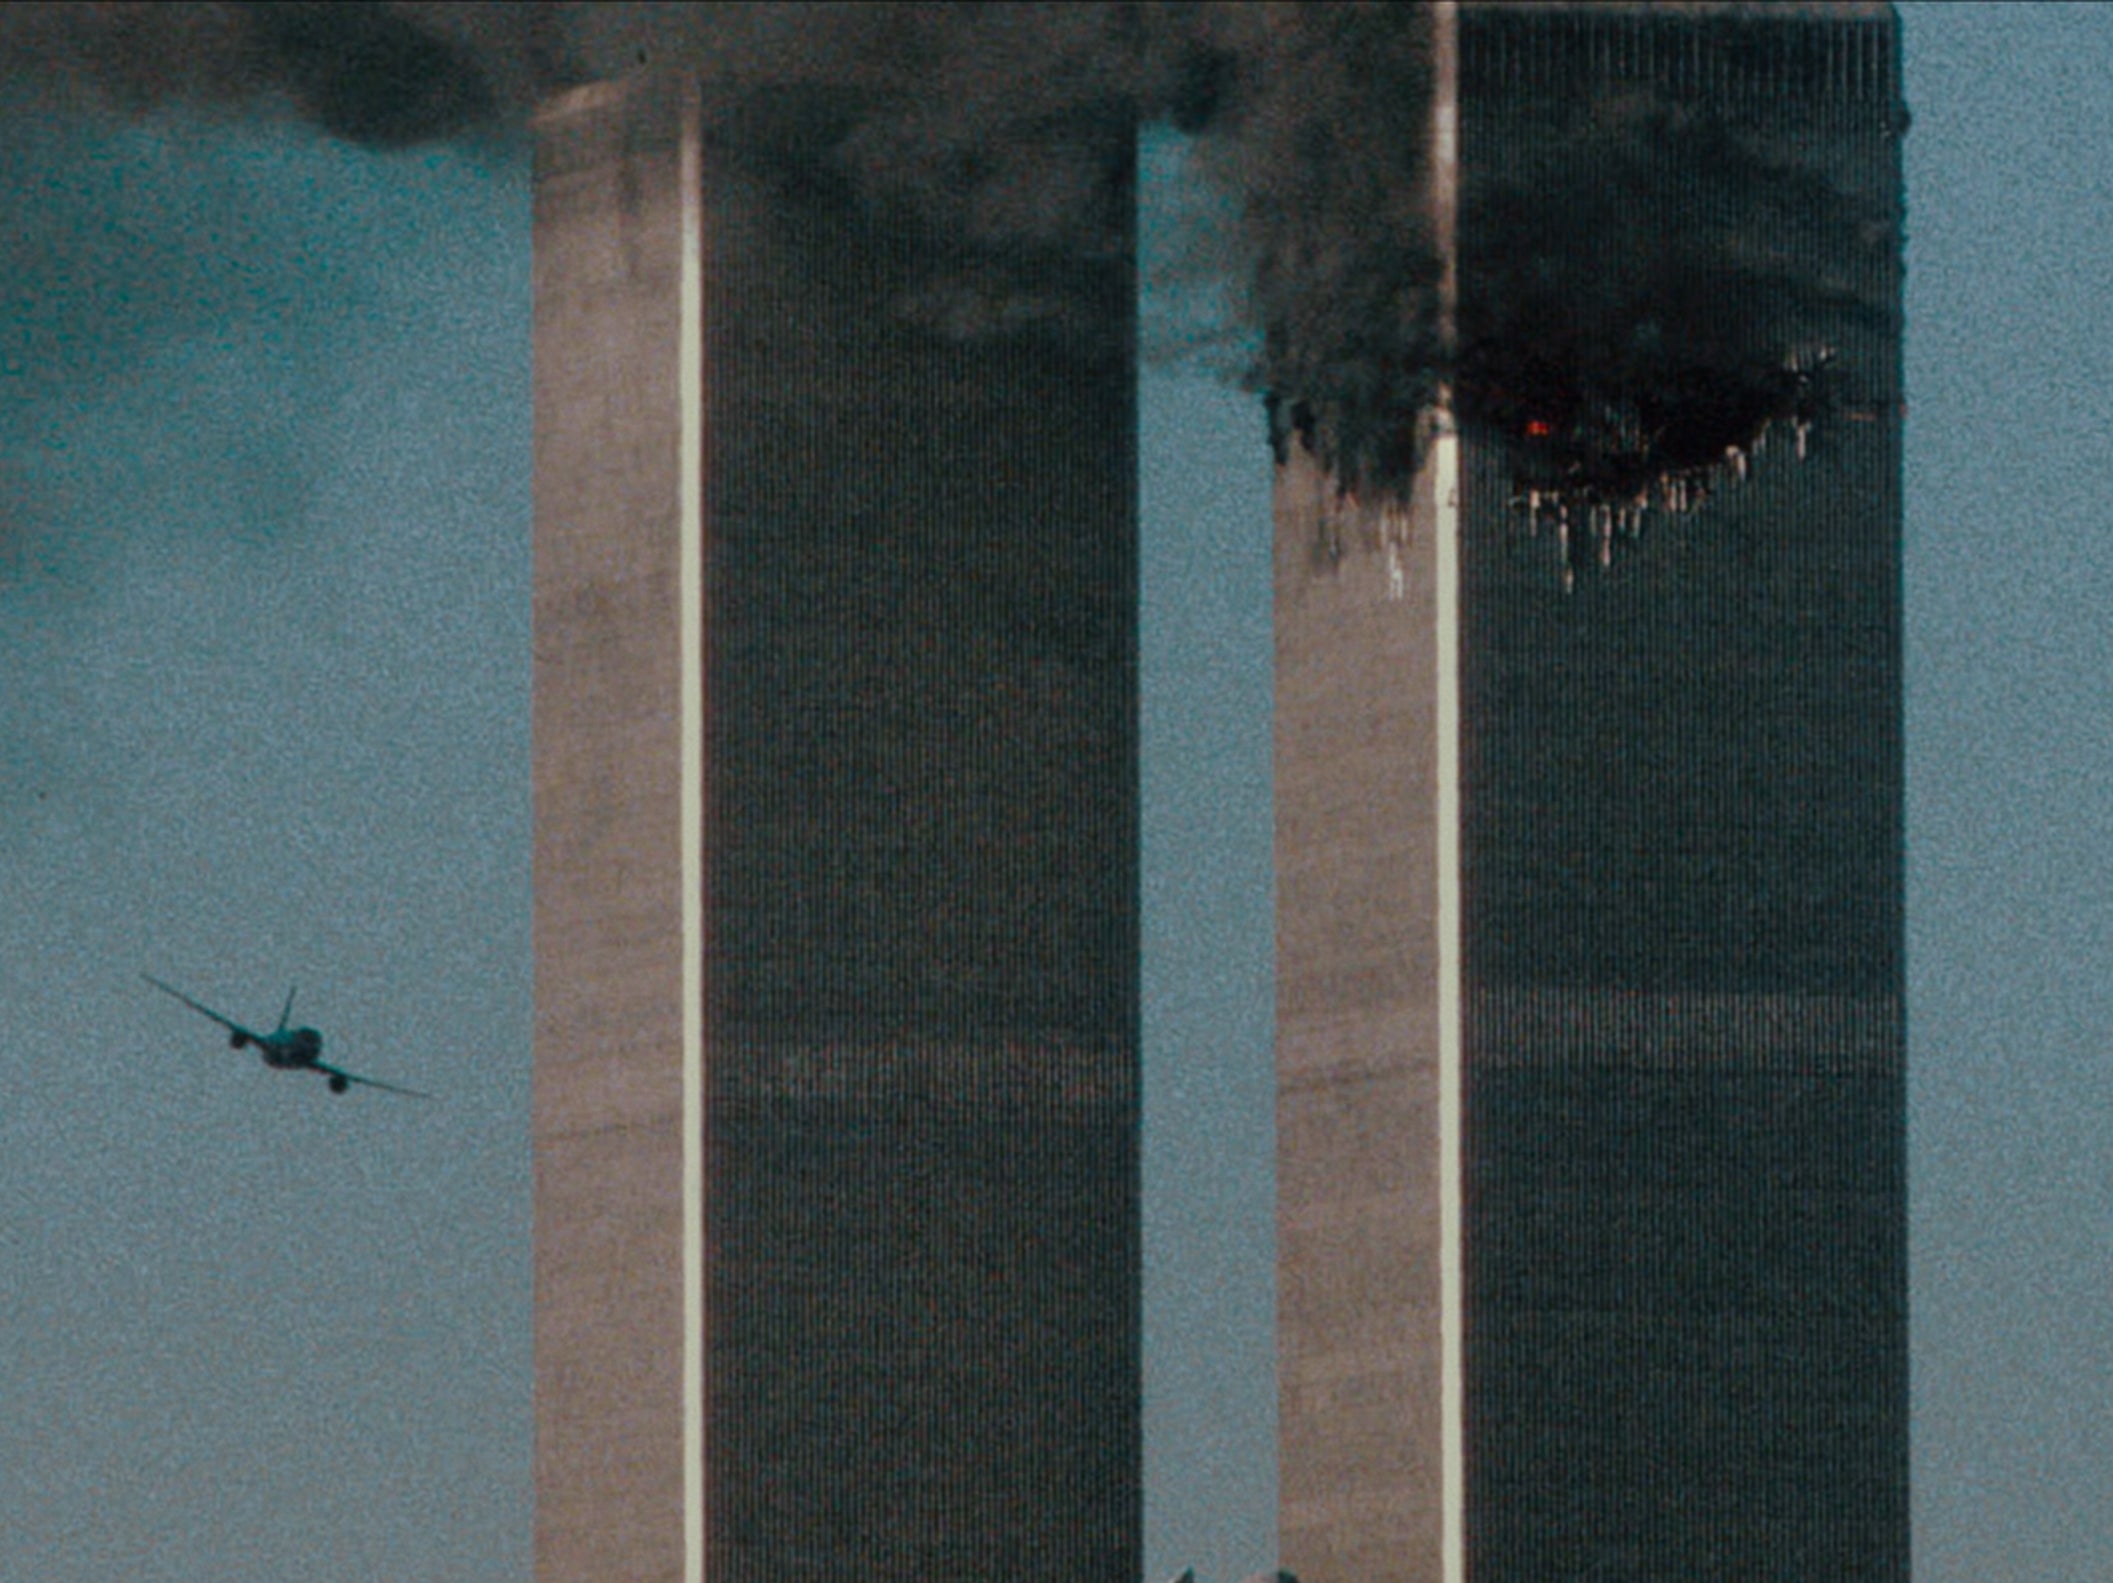 A shot of the second hijacked airplane just seconds before it struck the South Tower in the 9/11 terror attacks